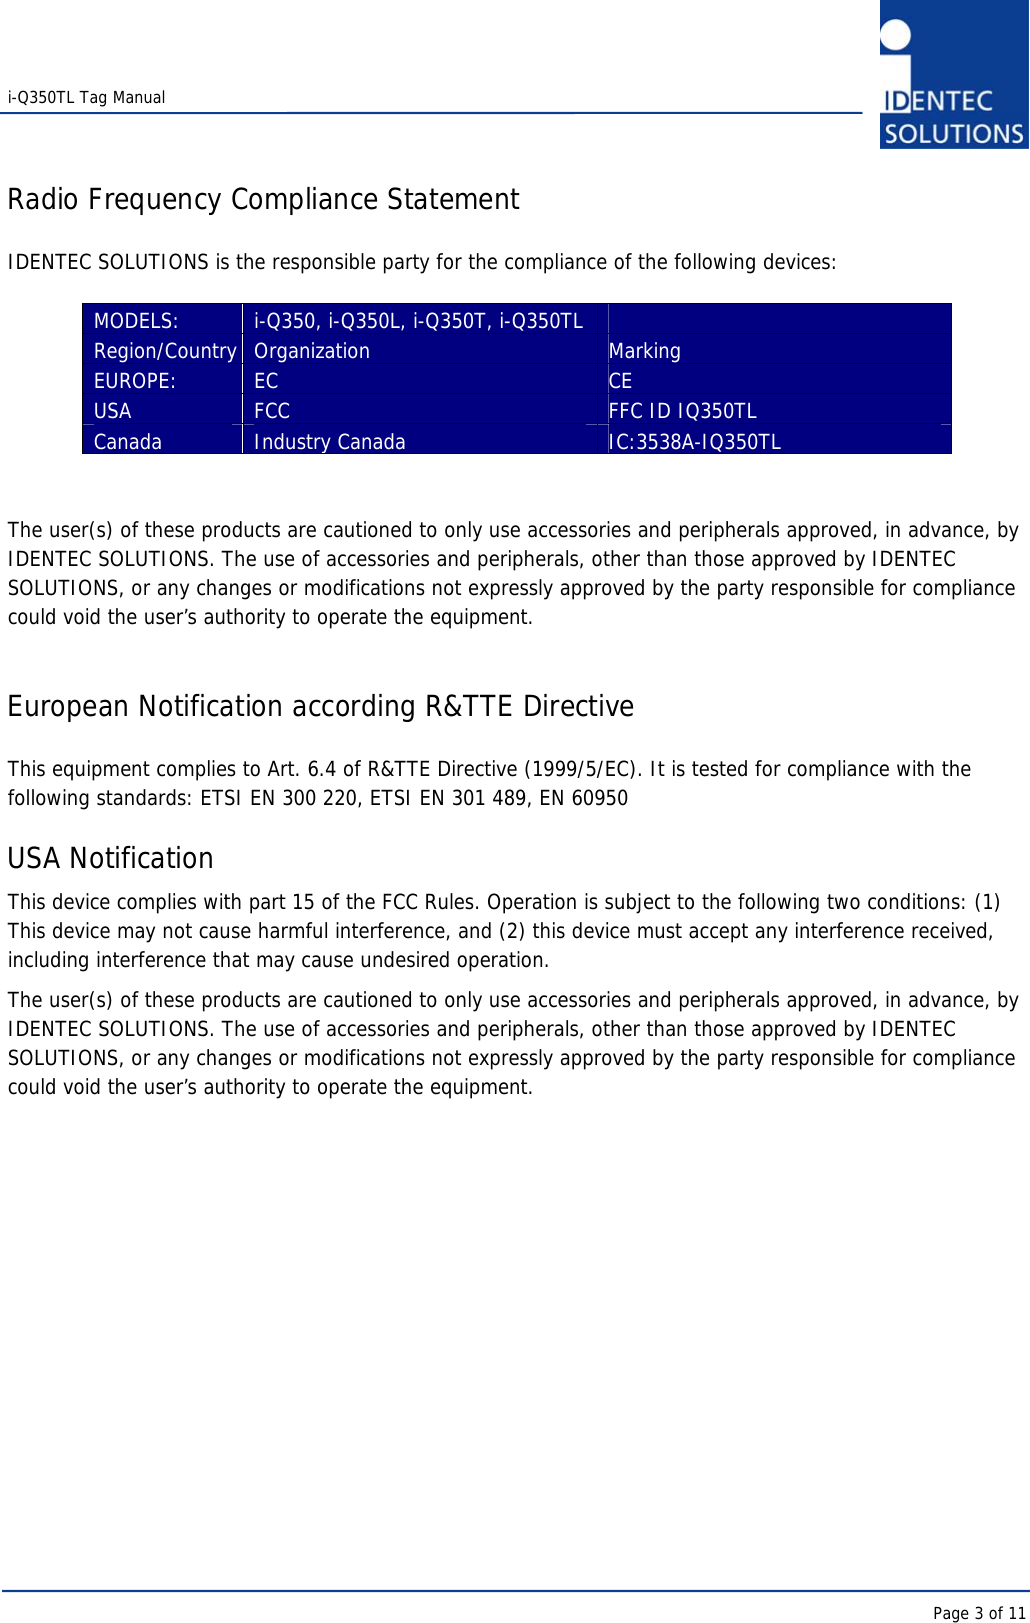   i-Q350TL Tag Manual      Page 3 of 11 Radio Frequency Compliance Statement  IDENTEC SOLUTIONS is the responsible party for the compliance of the following devices:  MODELS:  i-Q350, i-Q350L, i-Q350T, i-Q350TL   Region/Country Organization  Marking EUROPE:  EC   CE USA  FCC  FFC ID IQ350TL Canada  Industry Canada  IC:3538A-IQ350TL   The user(s) of these products are cautioned to only use accessories and peripherals approved, in advance, by IDENTEC SOLUTIONS. The use of accessories and peripherals, other than those approved by IDENTEC SOLUTIONS, or any changes or modifications not expressly approved by the party responsible for compliance could void the user’s authority to operate the equipment.   European Notification according R&amp;TTE Directive  This equipment complies to Art. 6.4 of R&amp;TTE Directive (1999/5/EC). It is tested for compliance with the following standards: ETSI EN 300 220, ETSI EN 301 489, EN 60950  USA Notification This device complies with part 15 of the FCC Rules. Operation is subject to the following two conditions: (1) This device may not cause harmful interference, and (2) this device must accept any interference received, including interference that may cause undesired operation. The user(s) of these products are cautioned to only use accessories and peripherals approved, in advance, by IDENTEC SOLUTIONS. The use of accessories and peripherals, other than those approved by IDENTEC SOLUTIONS, or any changes or modifications not expressly approved by the party responsible for compliance could void the user’s authority to operate the equipment.      